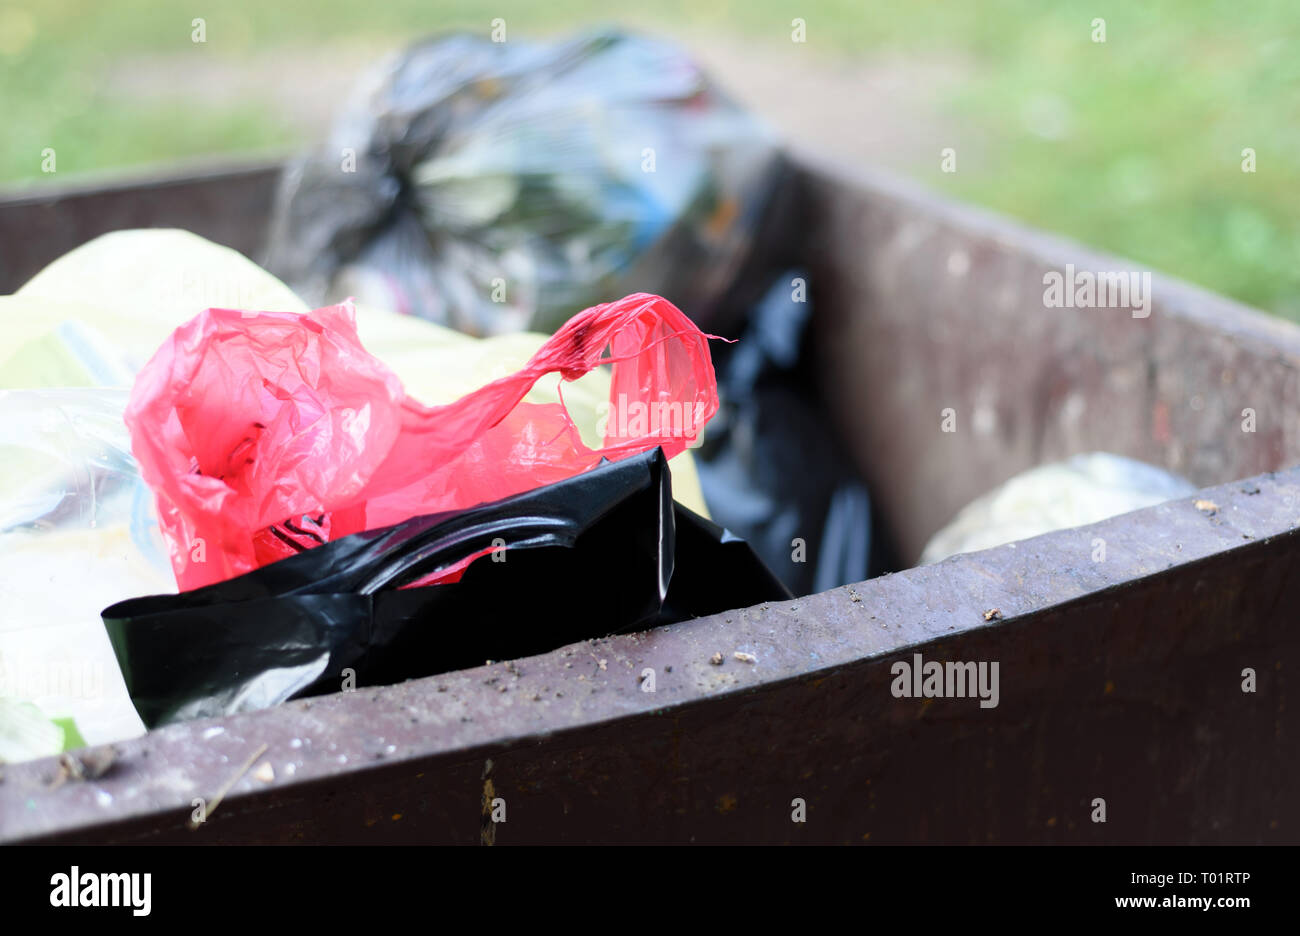 Plastic rubbish bags in a metal refuse bin awaiting collection as part of household waste Stock Photo